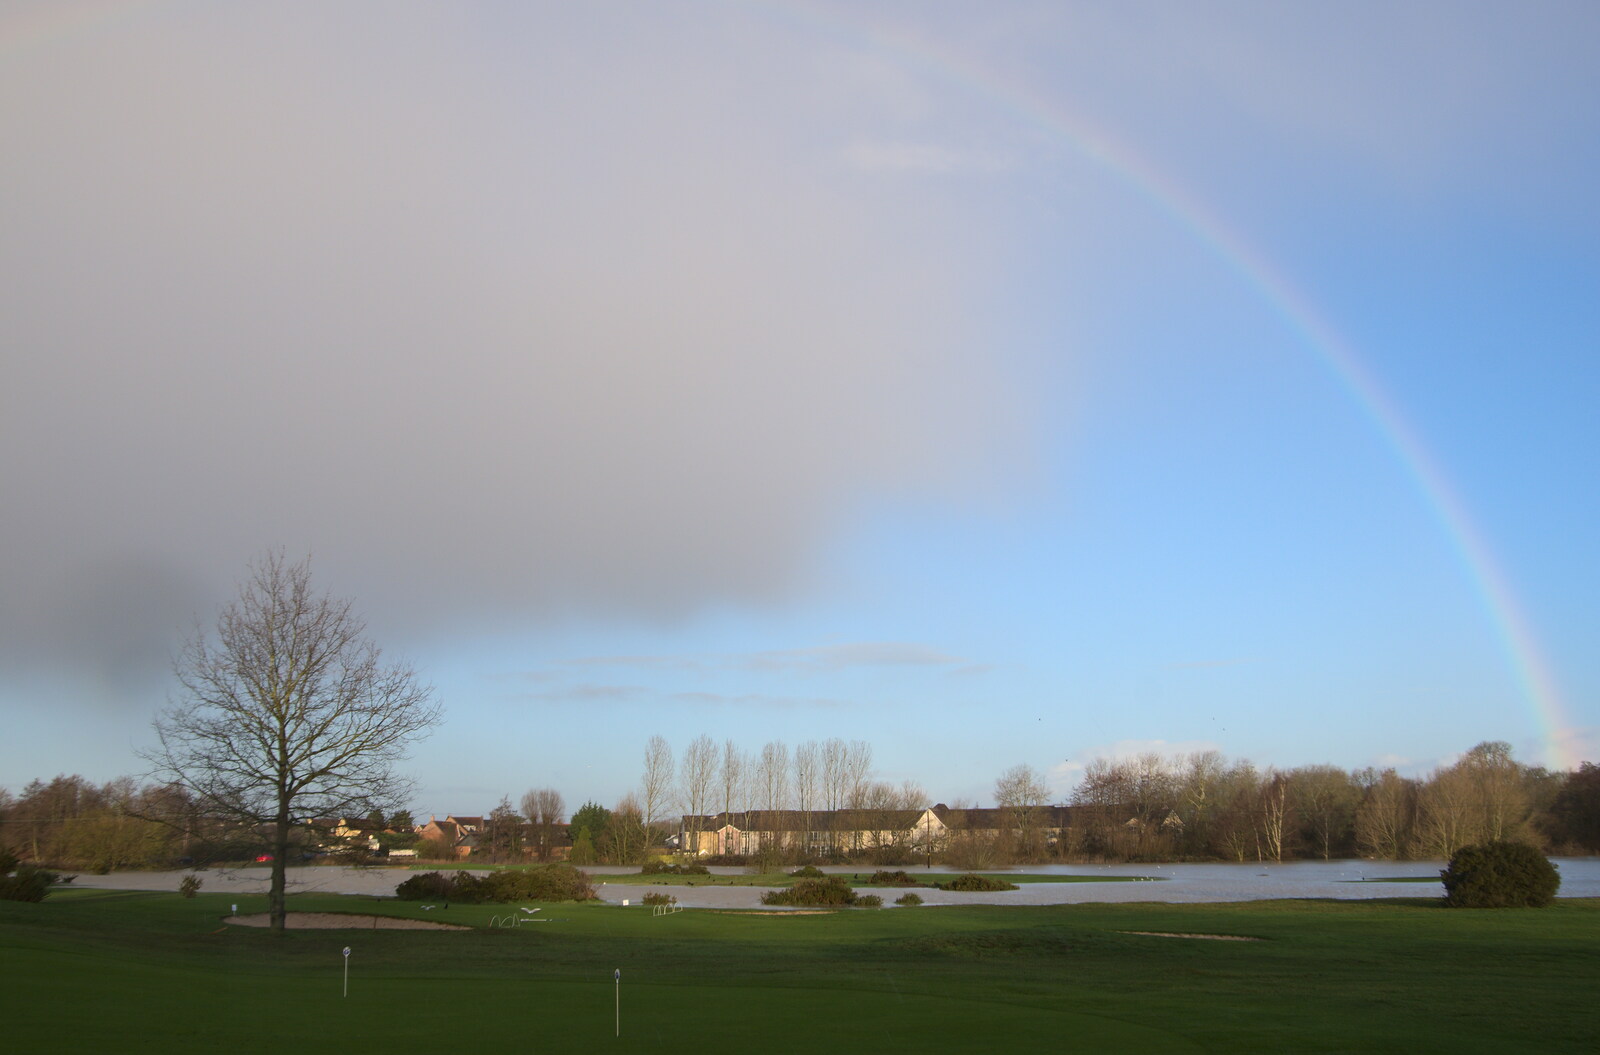 There's a rainbow over the flooded golf course from The Christmas Eve Floods, Diss, Norfolk - 24th December 2020